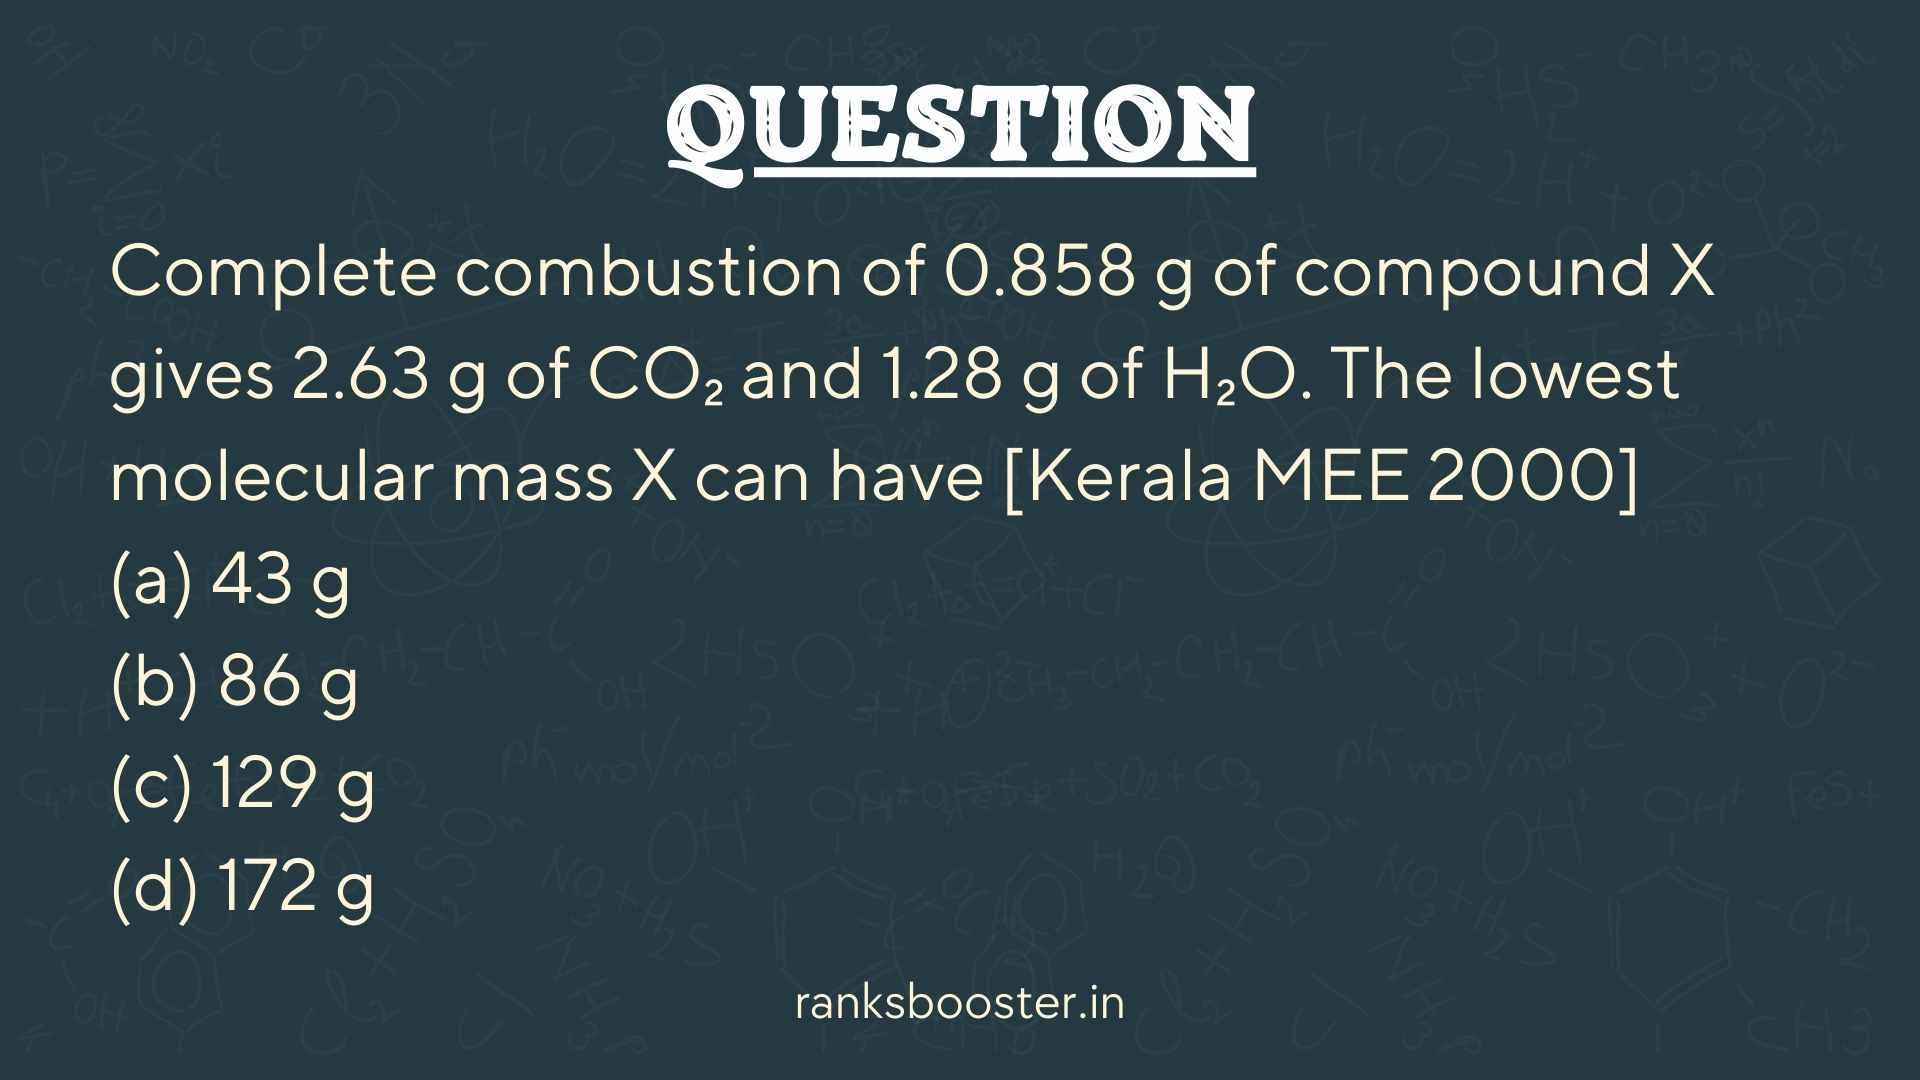 Question: Complete combustion of 0.858 g of compound X gives 2.63 g of CO₂ and 1.28 g of H₂O. The lowest molecular mass X can have [Kerala MEE 2000] (a) 43 g (b) 86 g (c) 129 g (d) 172 g